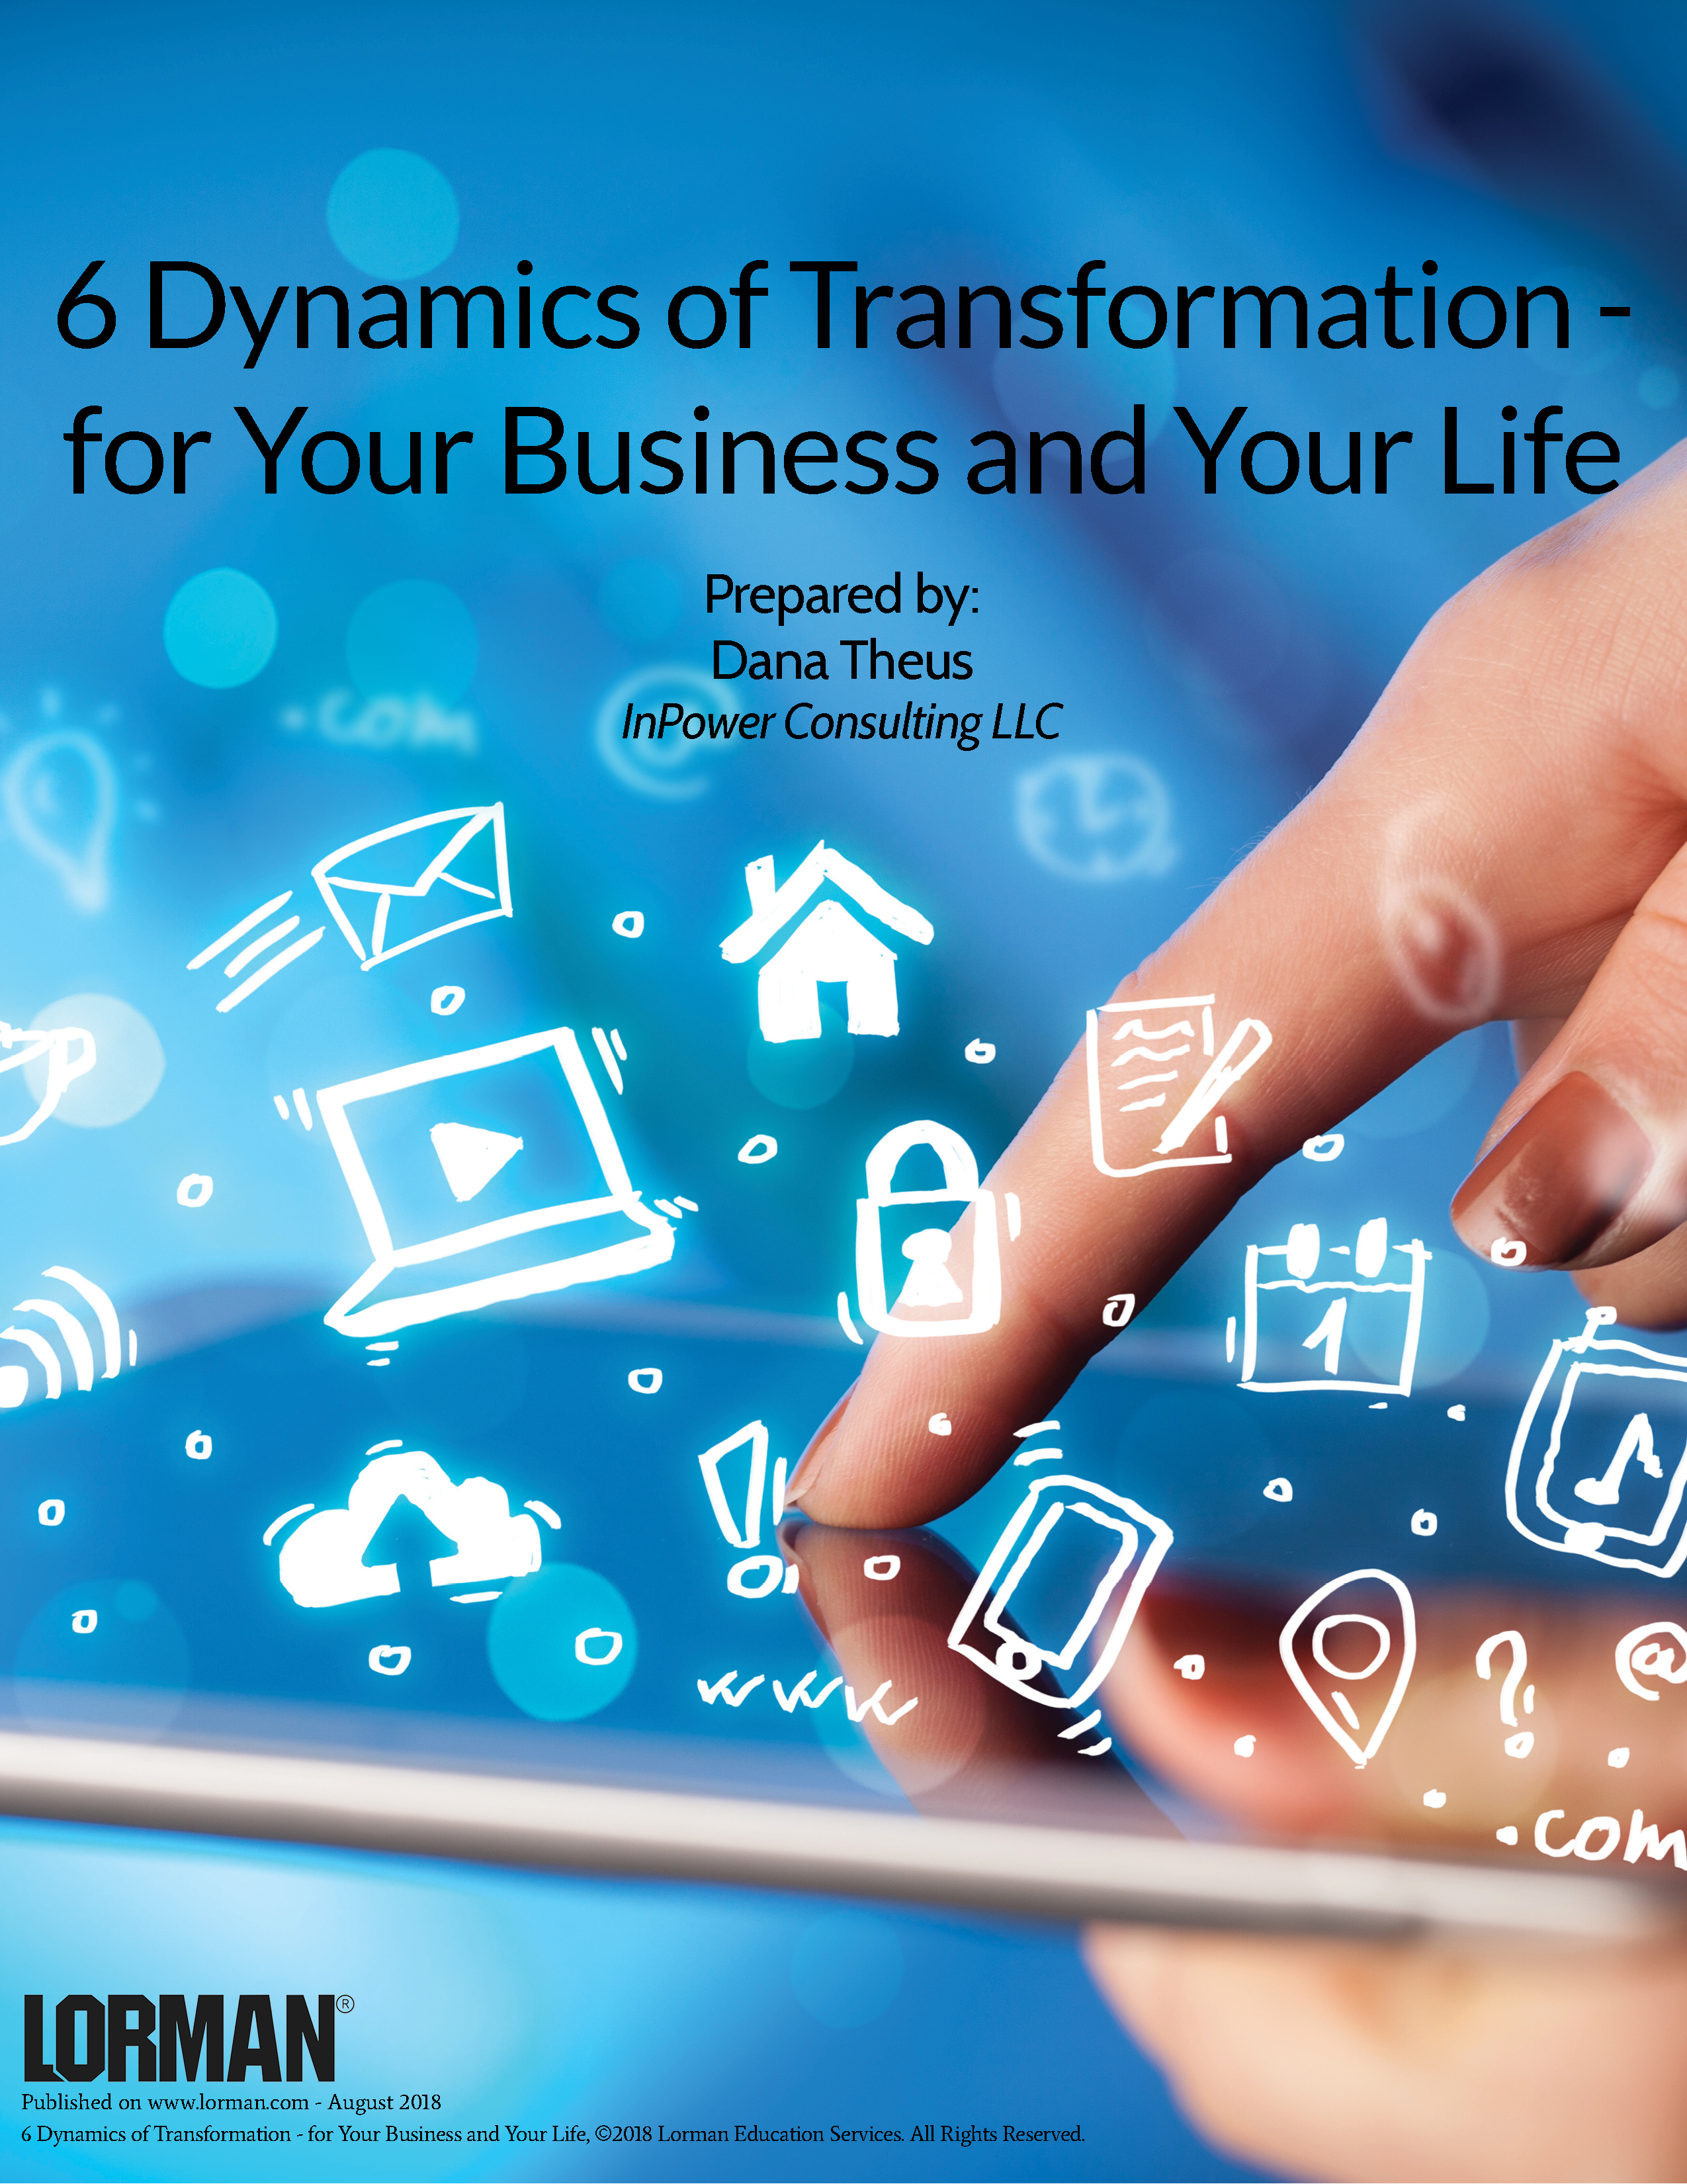 6 Dynamics of Transformation - for Your Business and Your Life